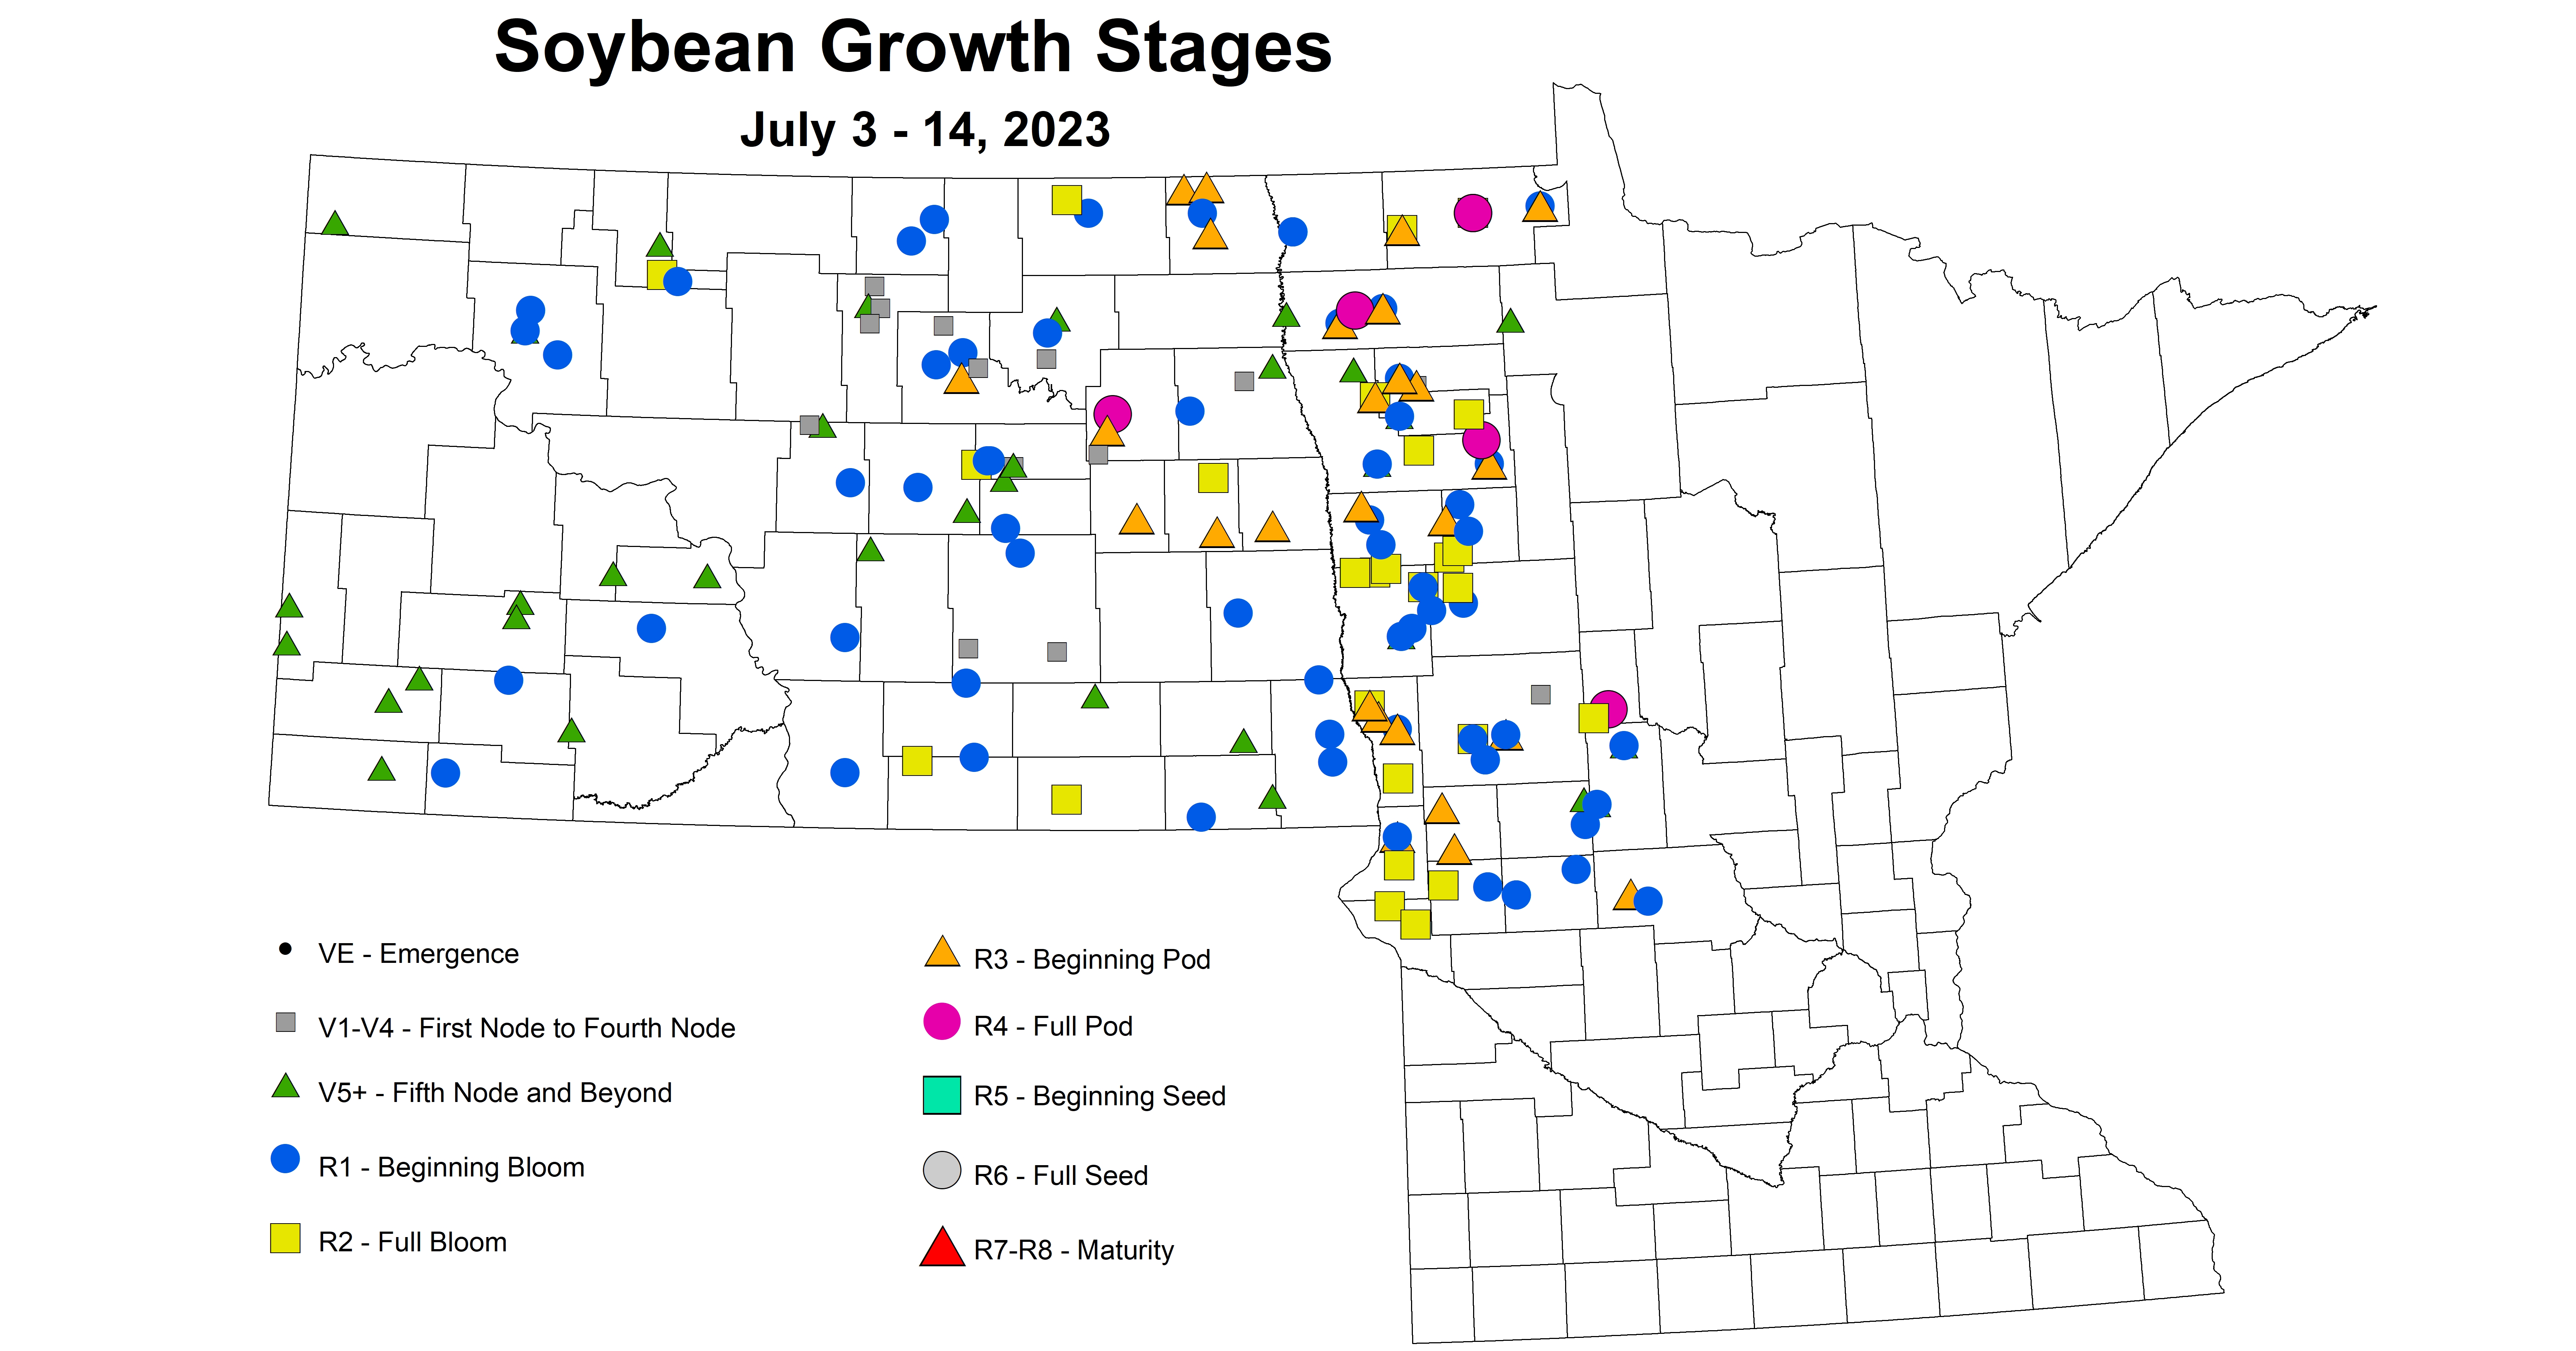 soybean growth stages July 3-14 2023